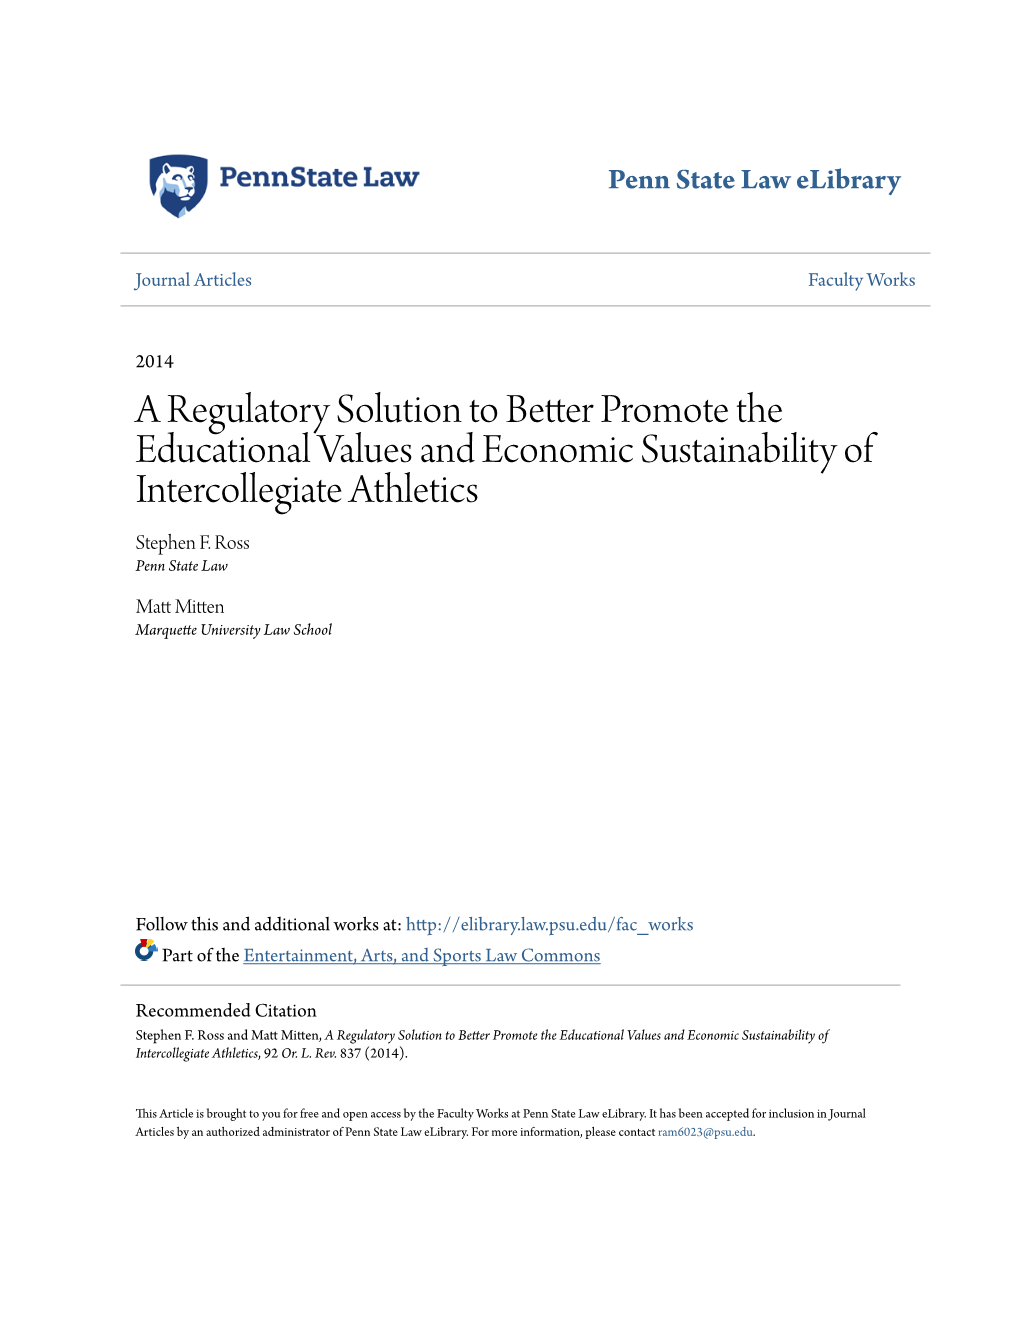 A Regulatory Solution to Better Promote the Educational Values and Economic Sustainability of Intercollegiate Athletics Stephen F